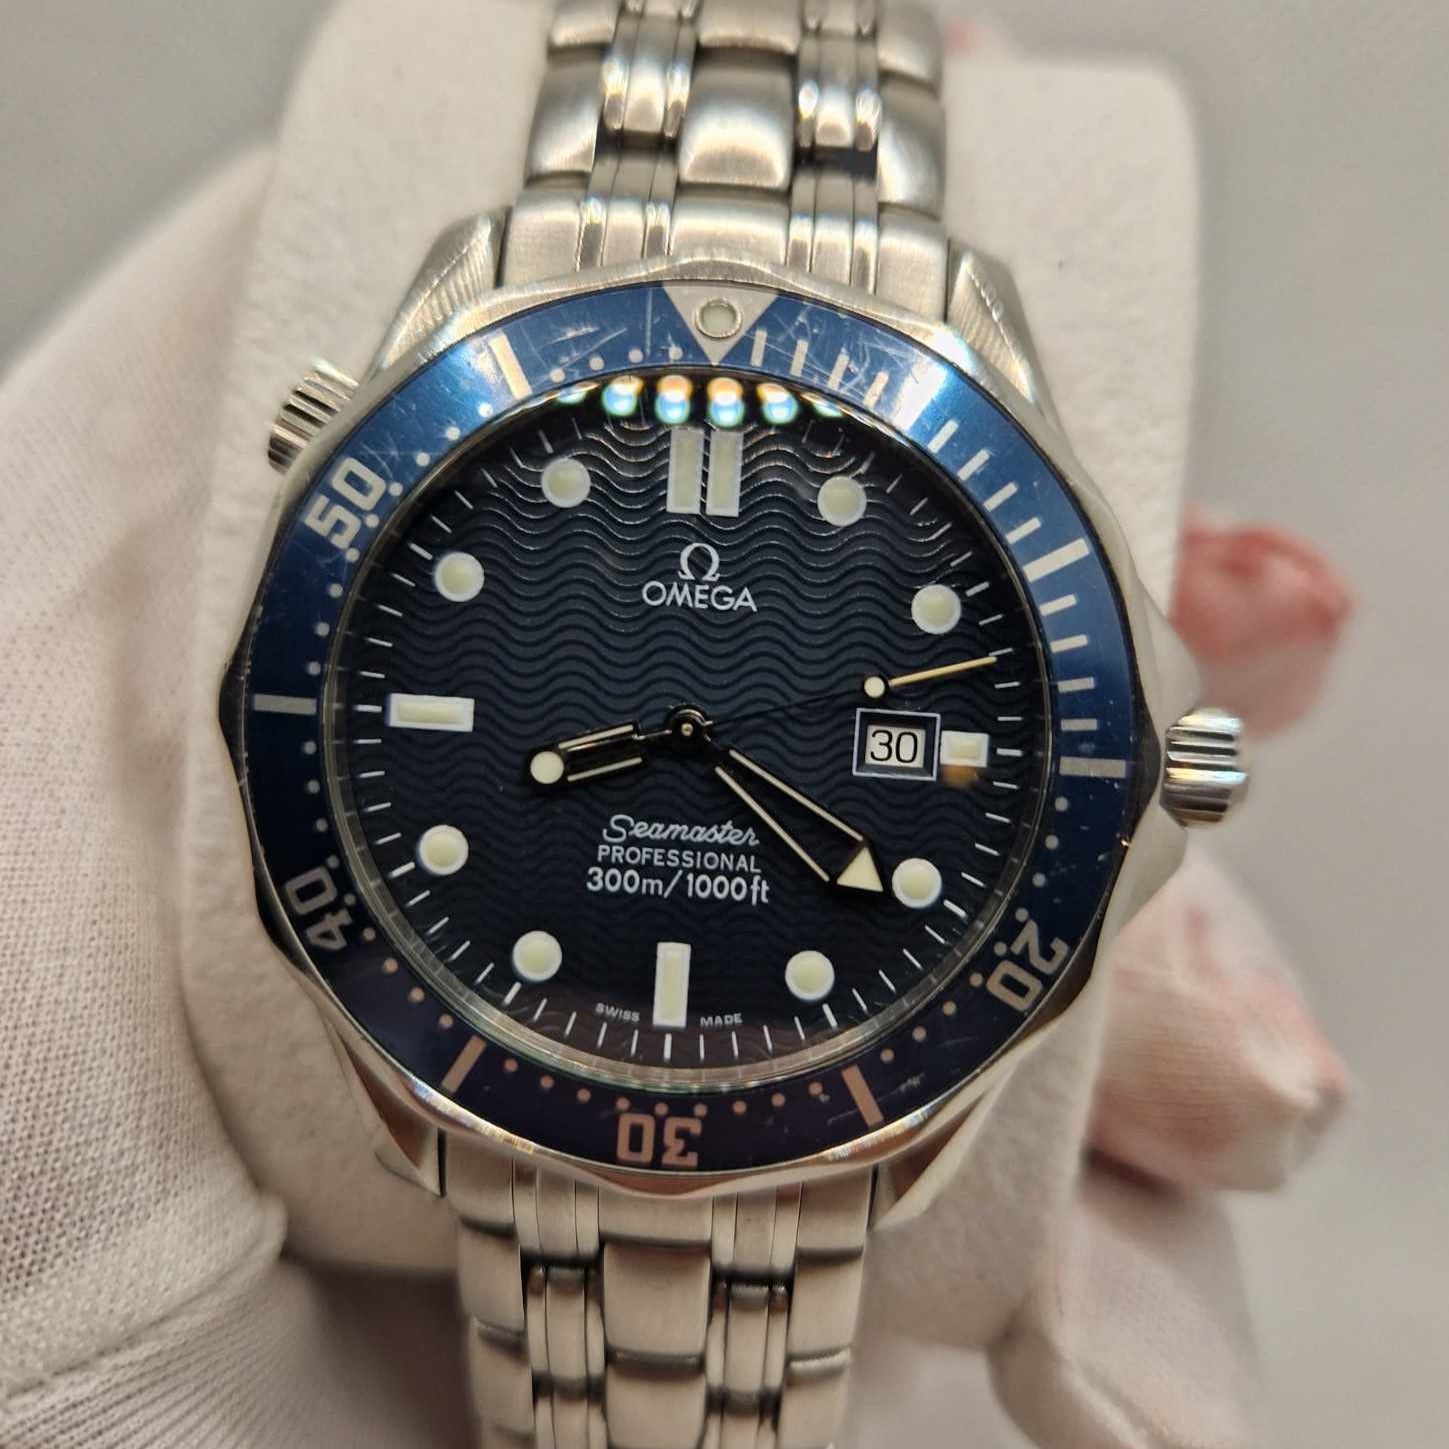 A close-up of the Omega Seamaster "GoldenEye" Quartz 2541.80.00 showcasing its captivating wave-pattern blue dial and illuminating hour markers.